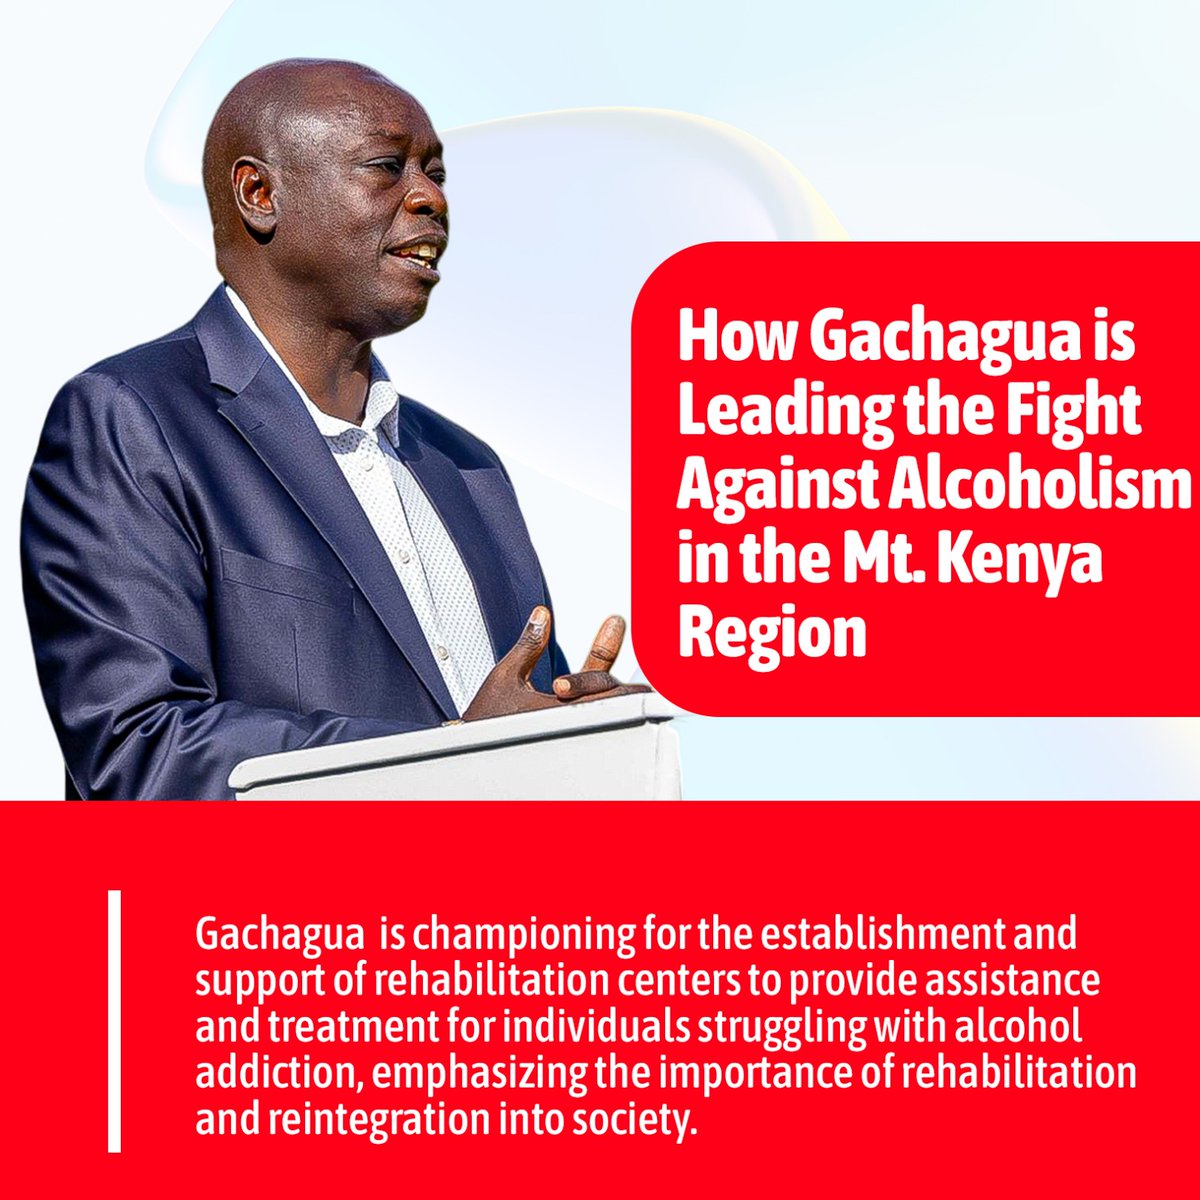 The government will build more rehabilitation centres to help young people using drugs and substance Stop Illicit Brew #GachaguaVsIllicitBrews #RigathiOnAssignment